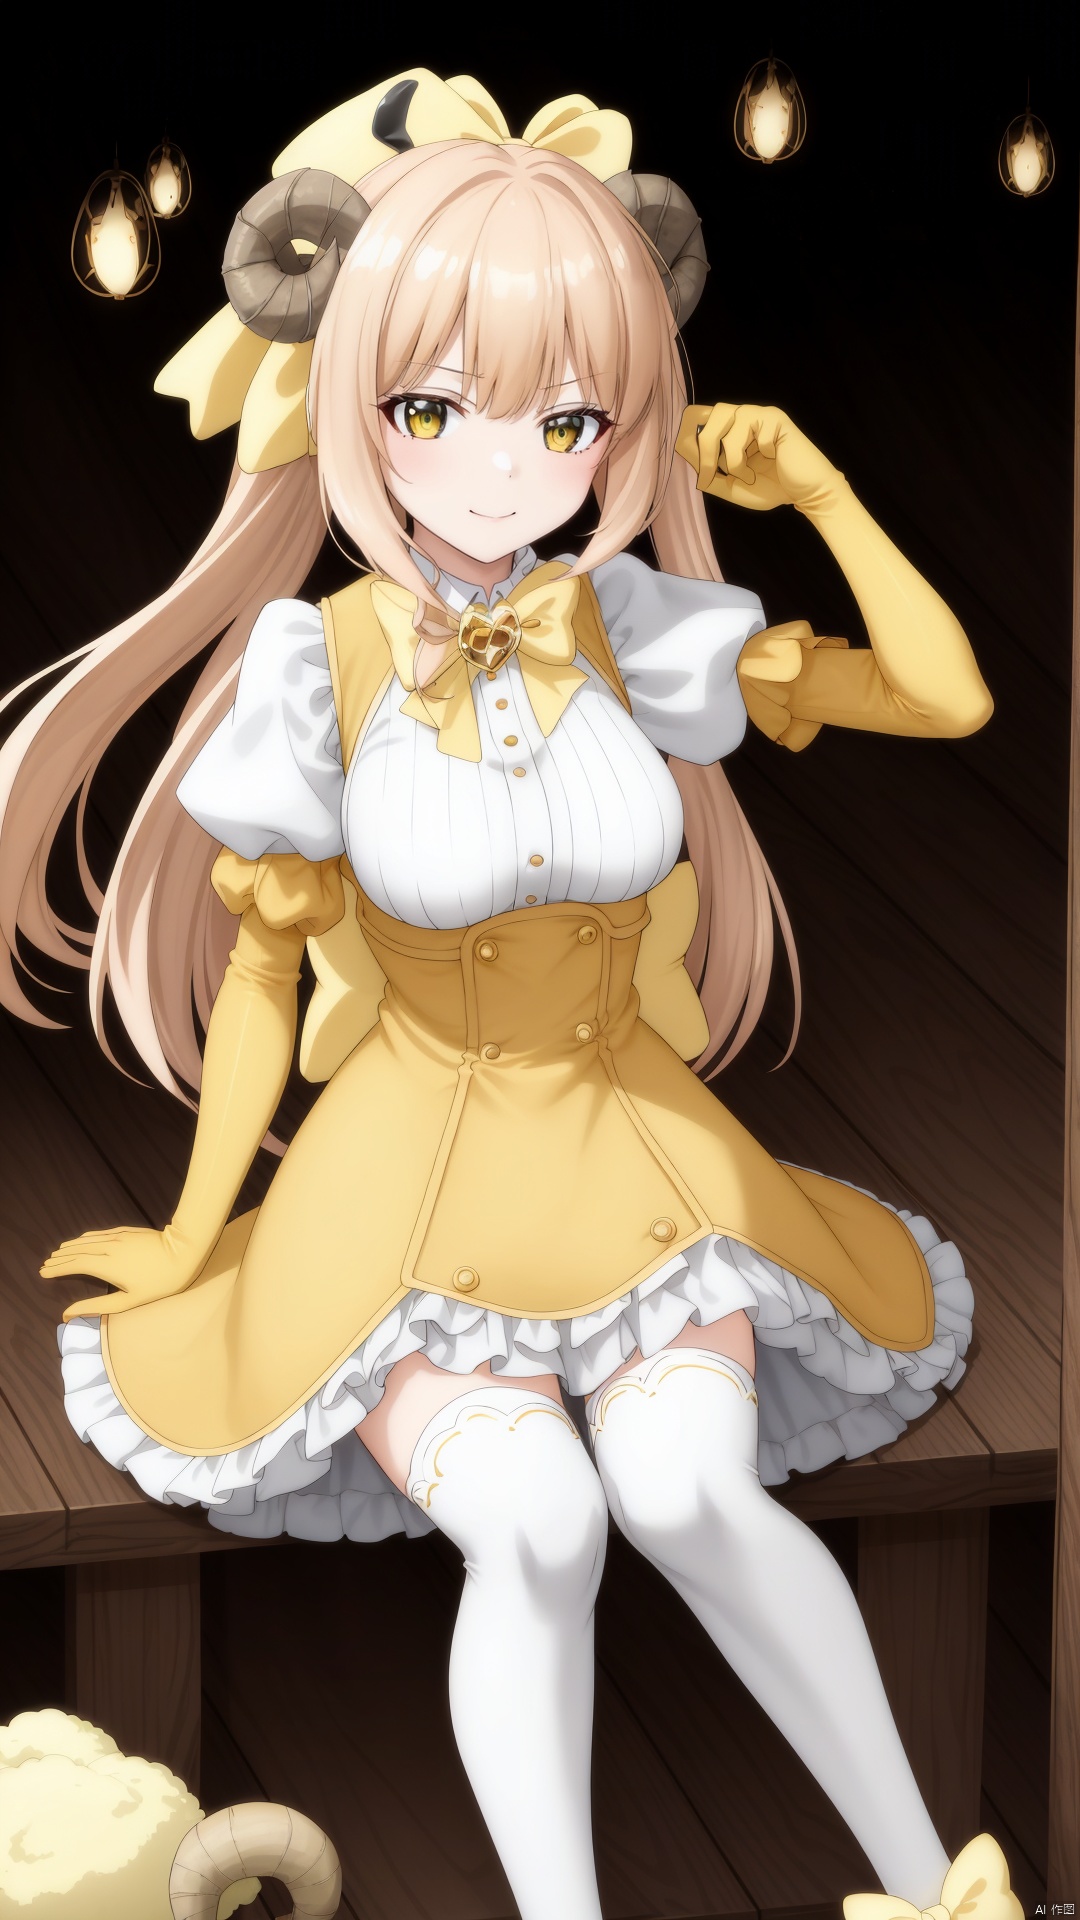 gloves,bow,dress,thighhighs,elbow gloves,1girl,puffy sleeves,hair bow,breasts,魔法枫糖, A young girl,A girl,Two yellow sheep hor